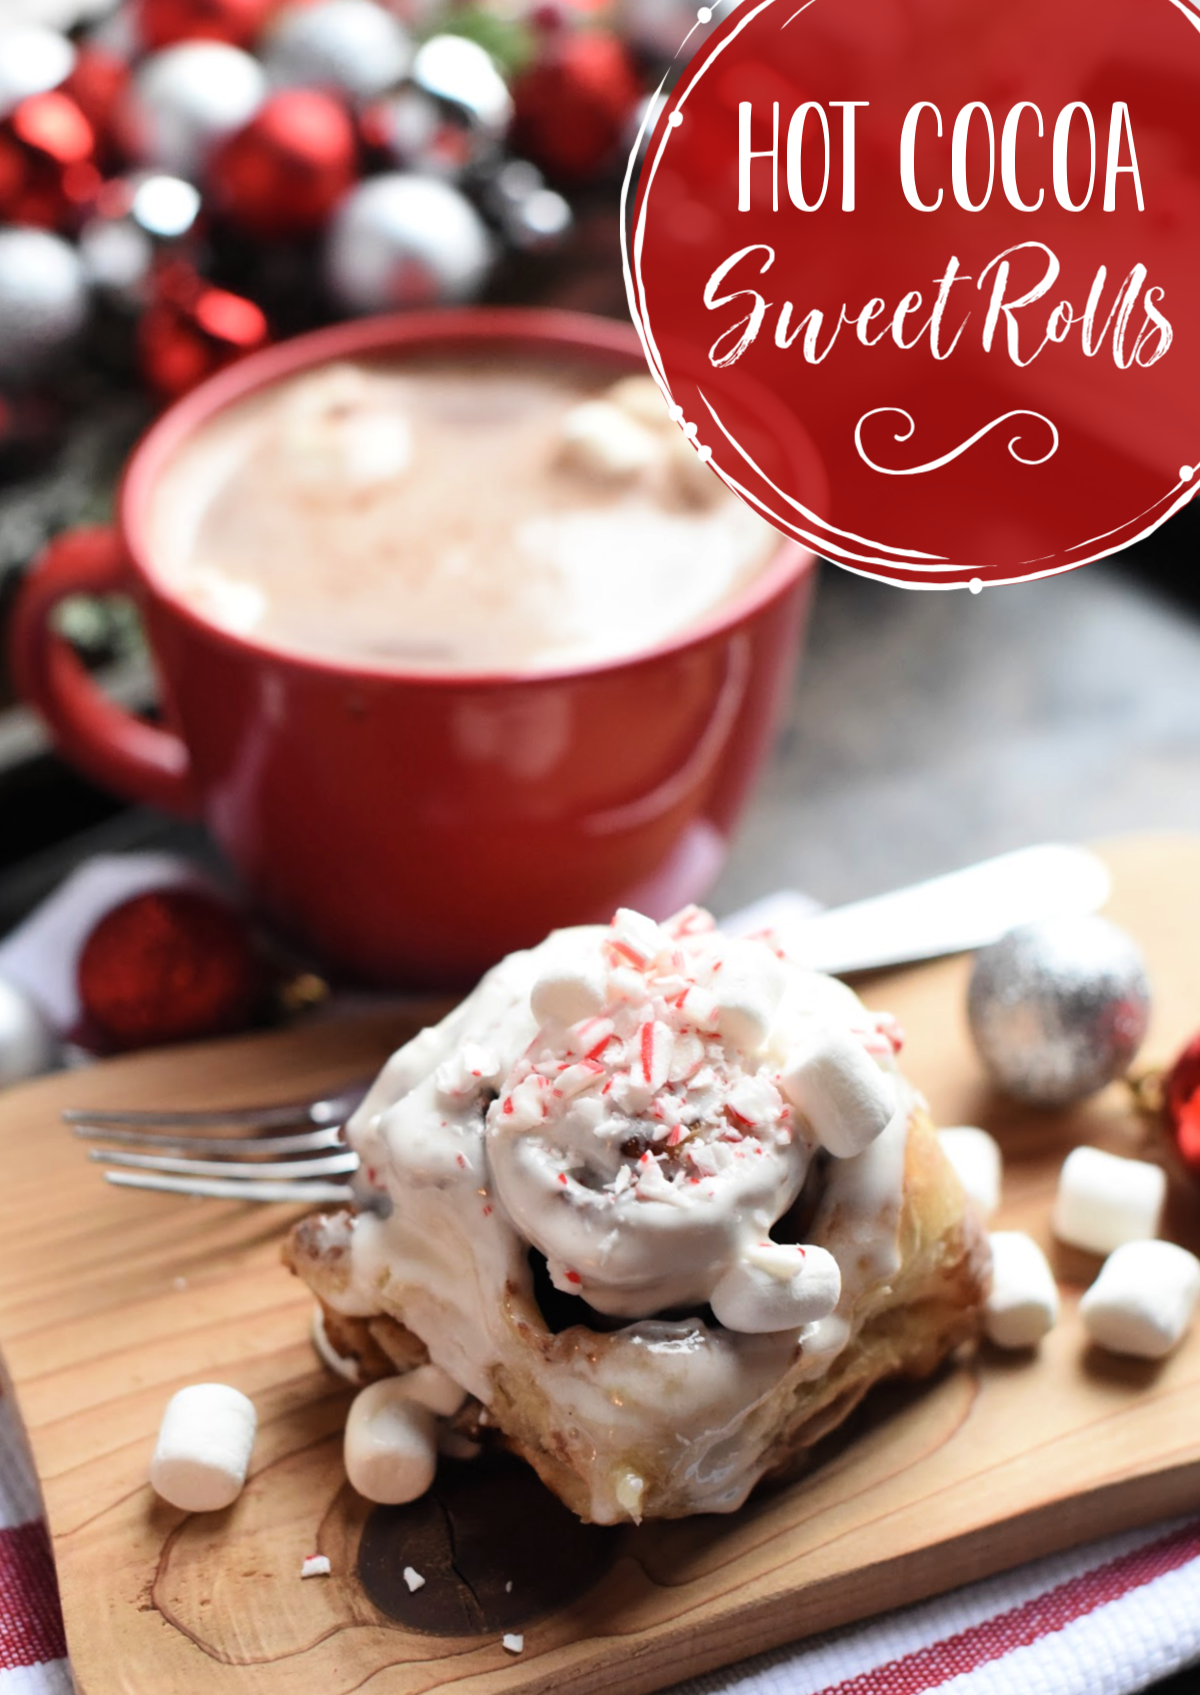 Hot Chocolate Sweet Rolls-These rolls are filled with a warm chocolate and topped with marshmallow icing. Sprinkle crushed peppermint on top for a perfect Christmas breakfast or treat. Made with Rhodes Bake N Serv rolls meaning they are super easy and taste amazing! #christmas #christmasbreakfast #breakfast #dessert #dessertrecipes